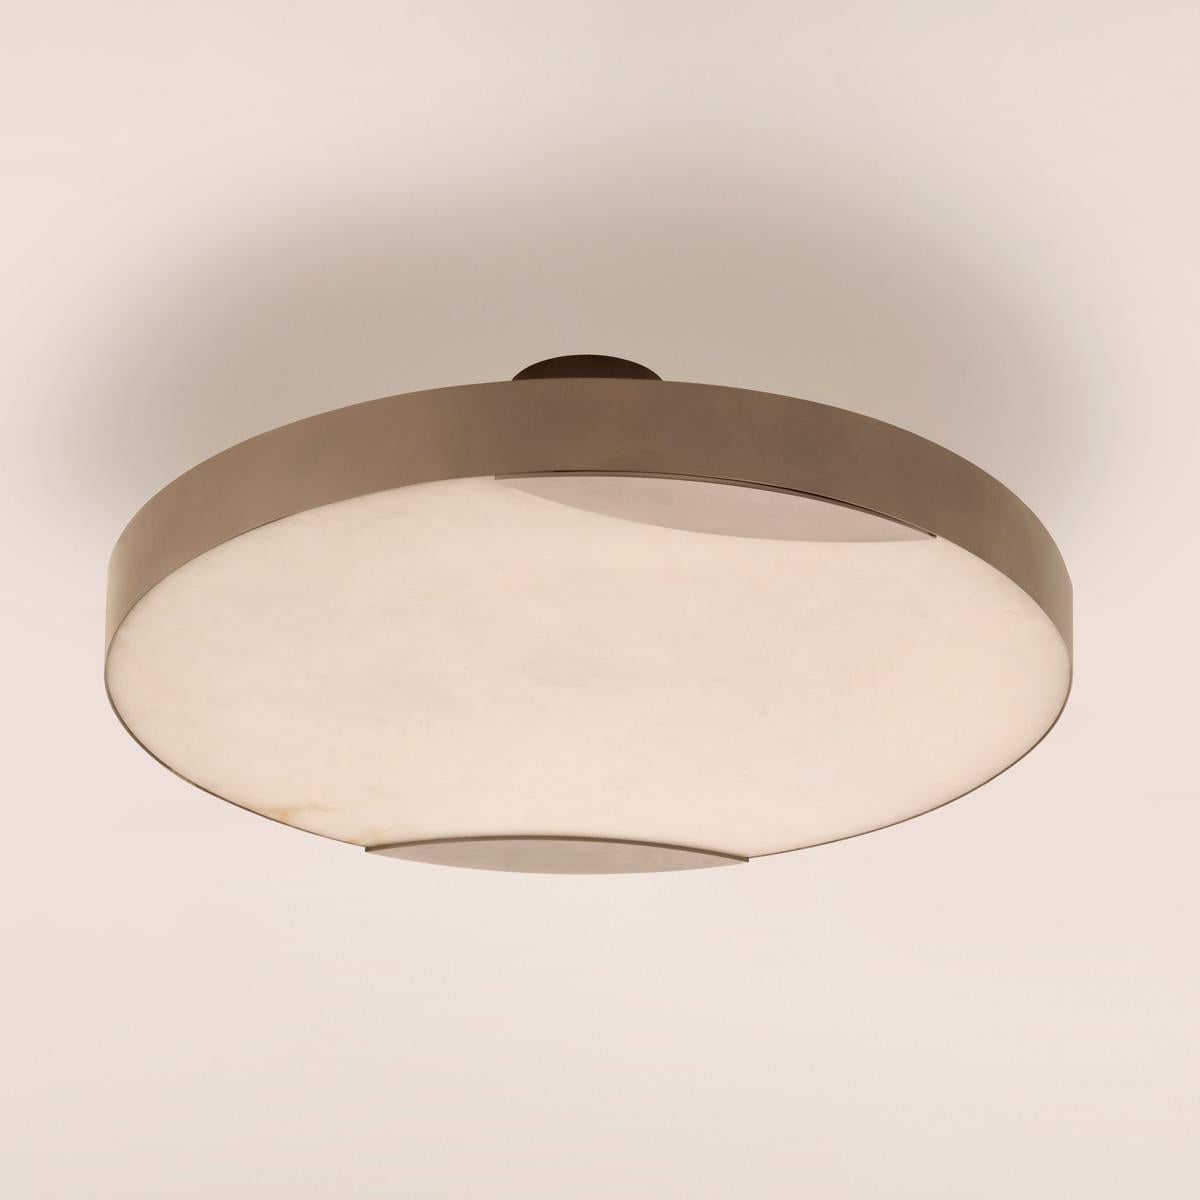 Italian Cloud N.1 Ceiling Light by Gaspare Asaro-Satin Brass Finish For Sale